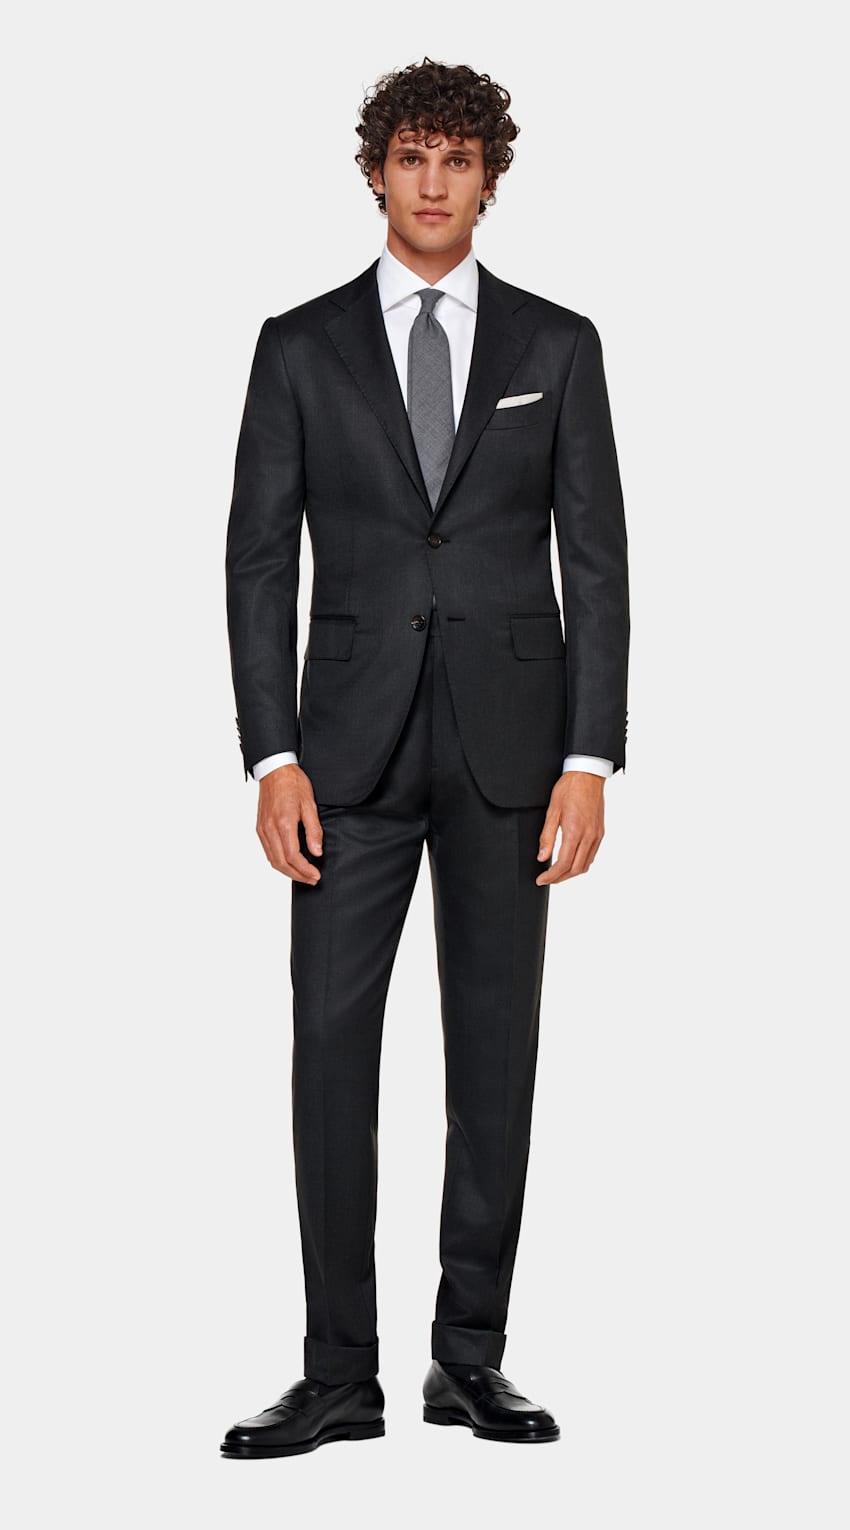 SUITSUPPLY All Season Wool Cashmere by E.Thomas, Italy Dark Grey Tailored Fit Lazio Suit